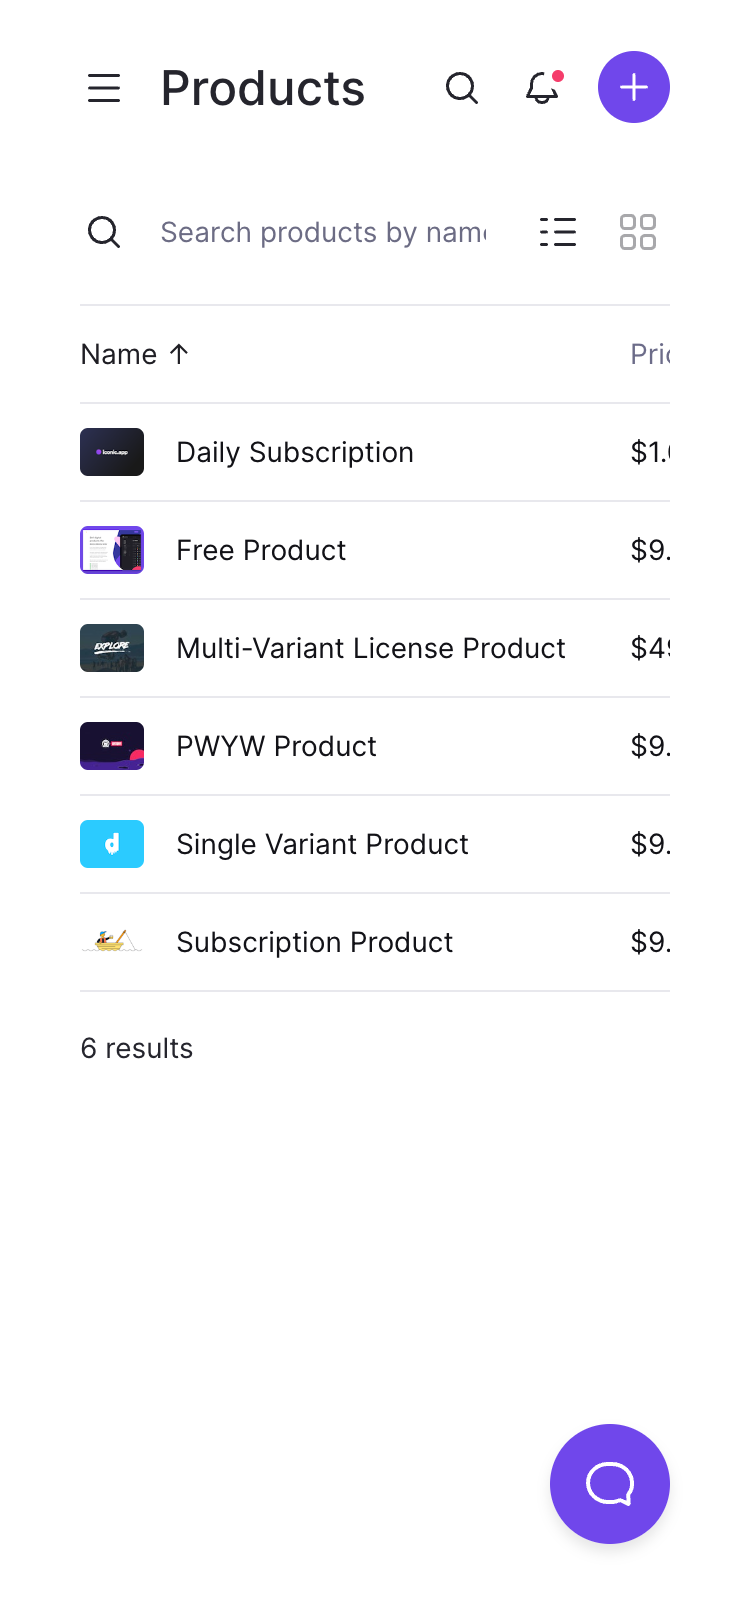 Screenshot of the Products page with a list of products on a 375-pixel wide mobile device. Products are listed in a table with basic information and revenue metrics. The table can be scrolled sideways as it doesn’t fit in the viewport.